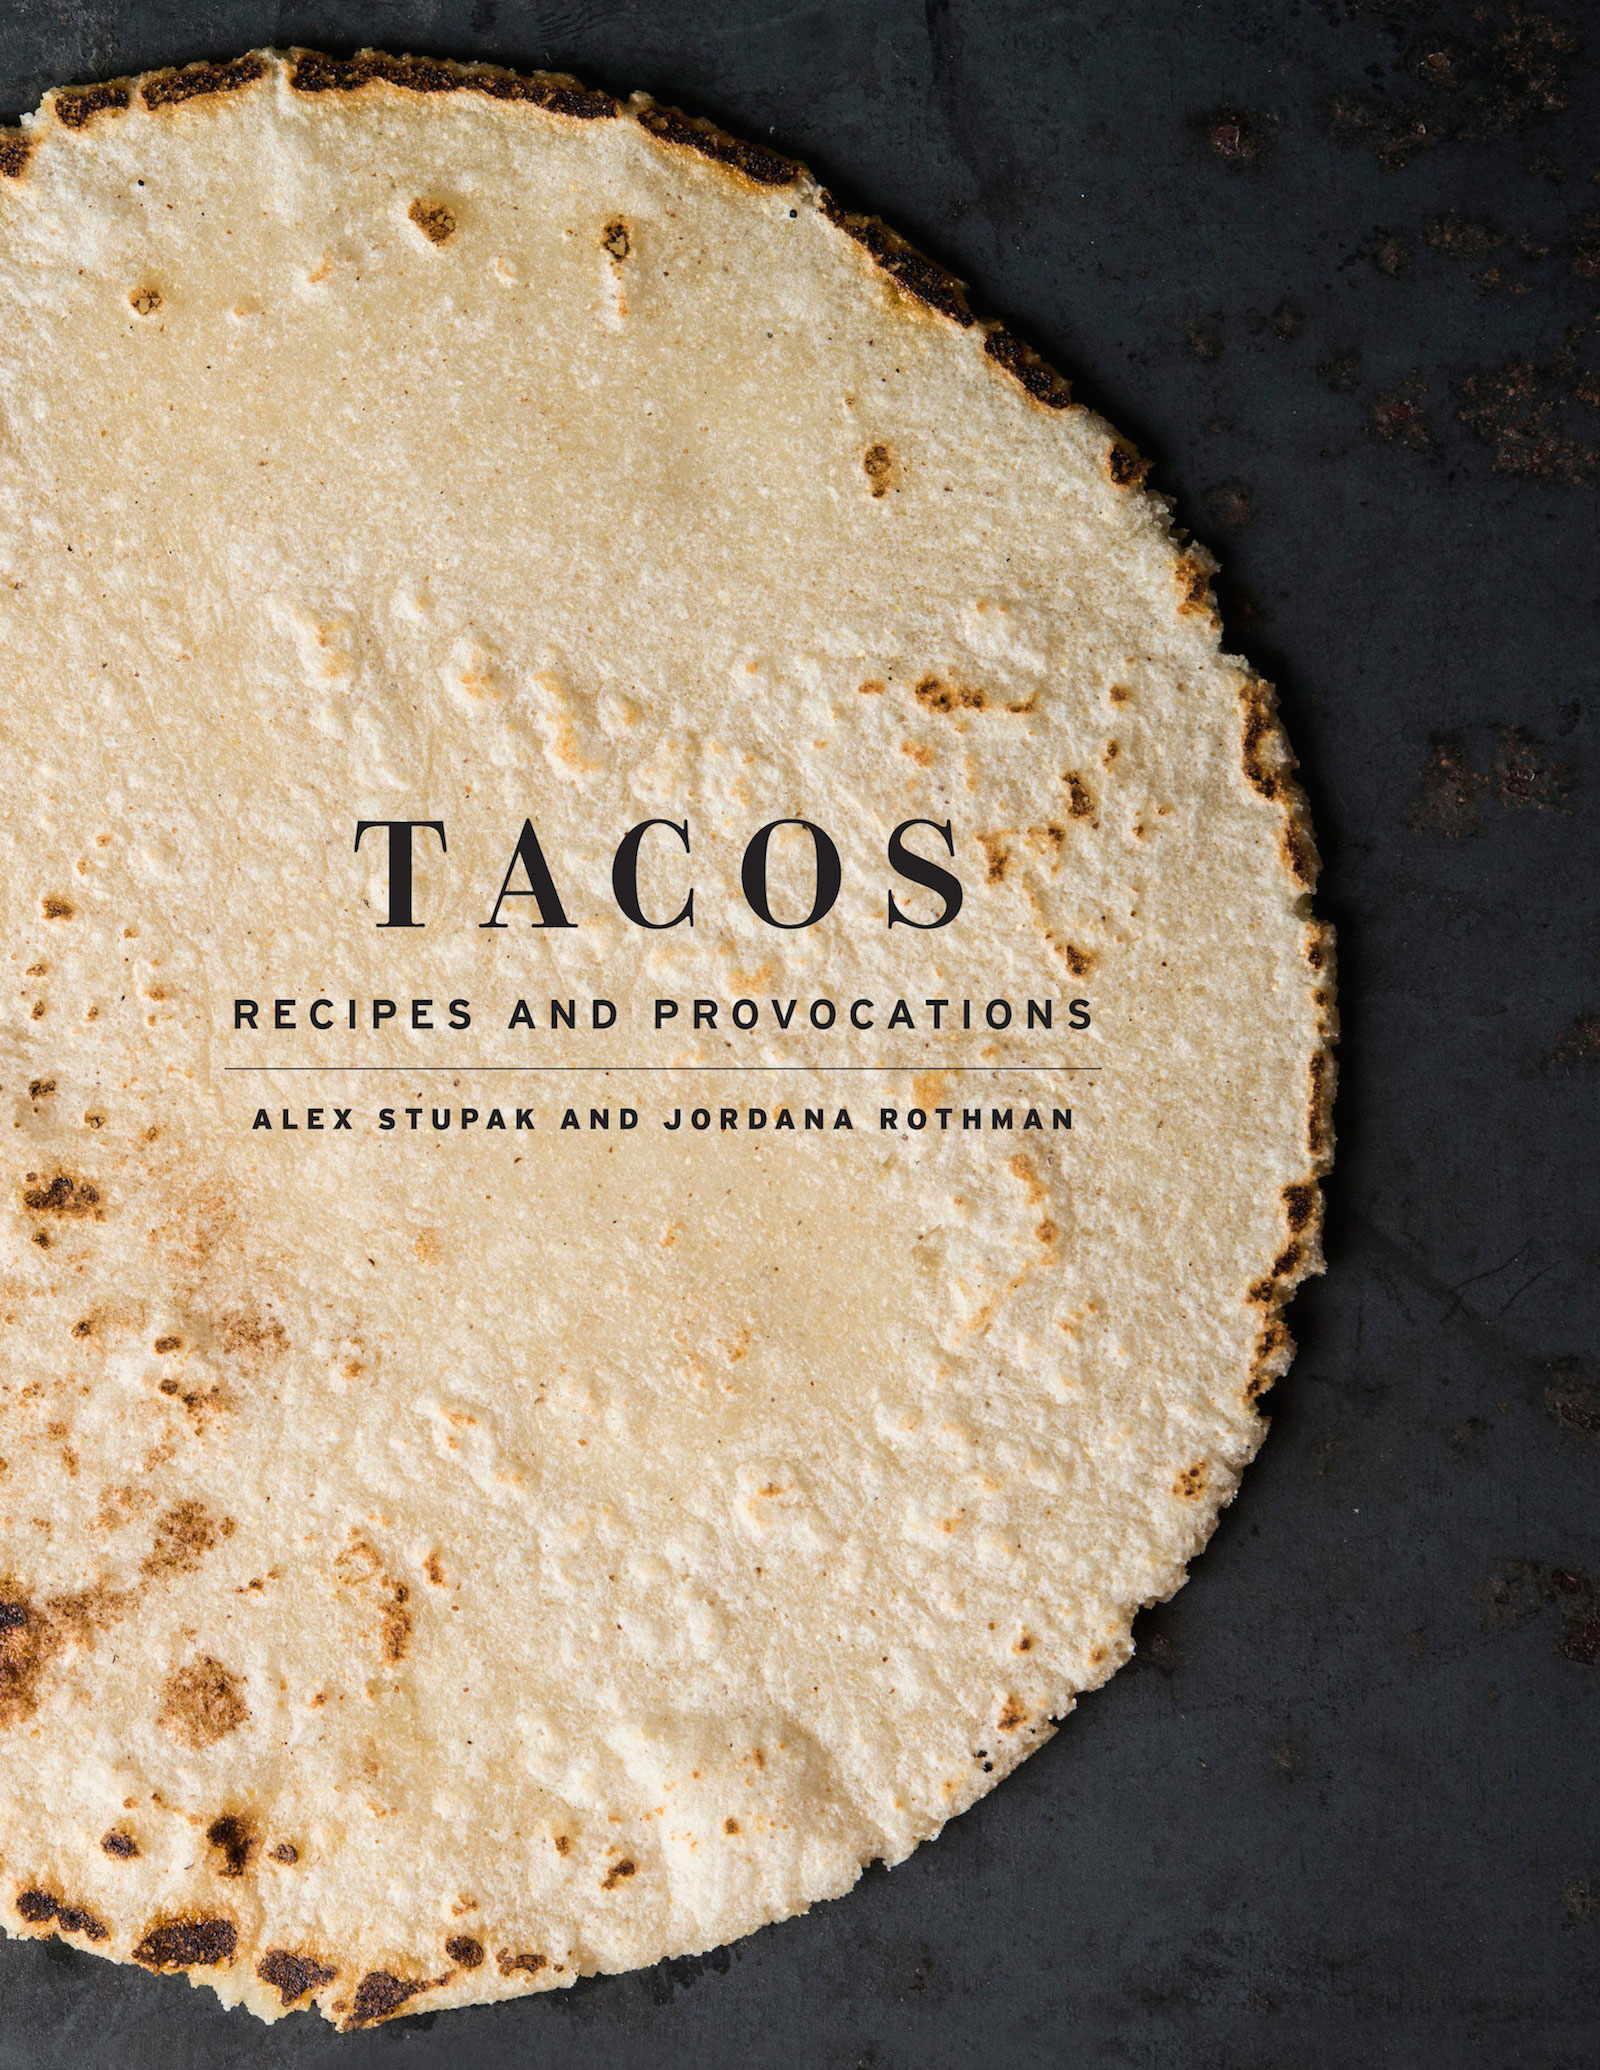 Tacos Recipes and Provocations - photo 1